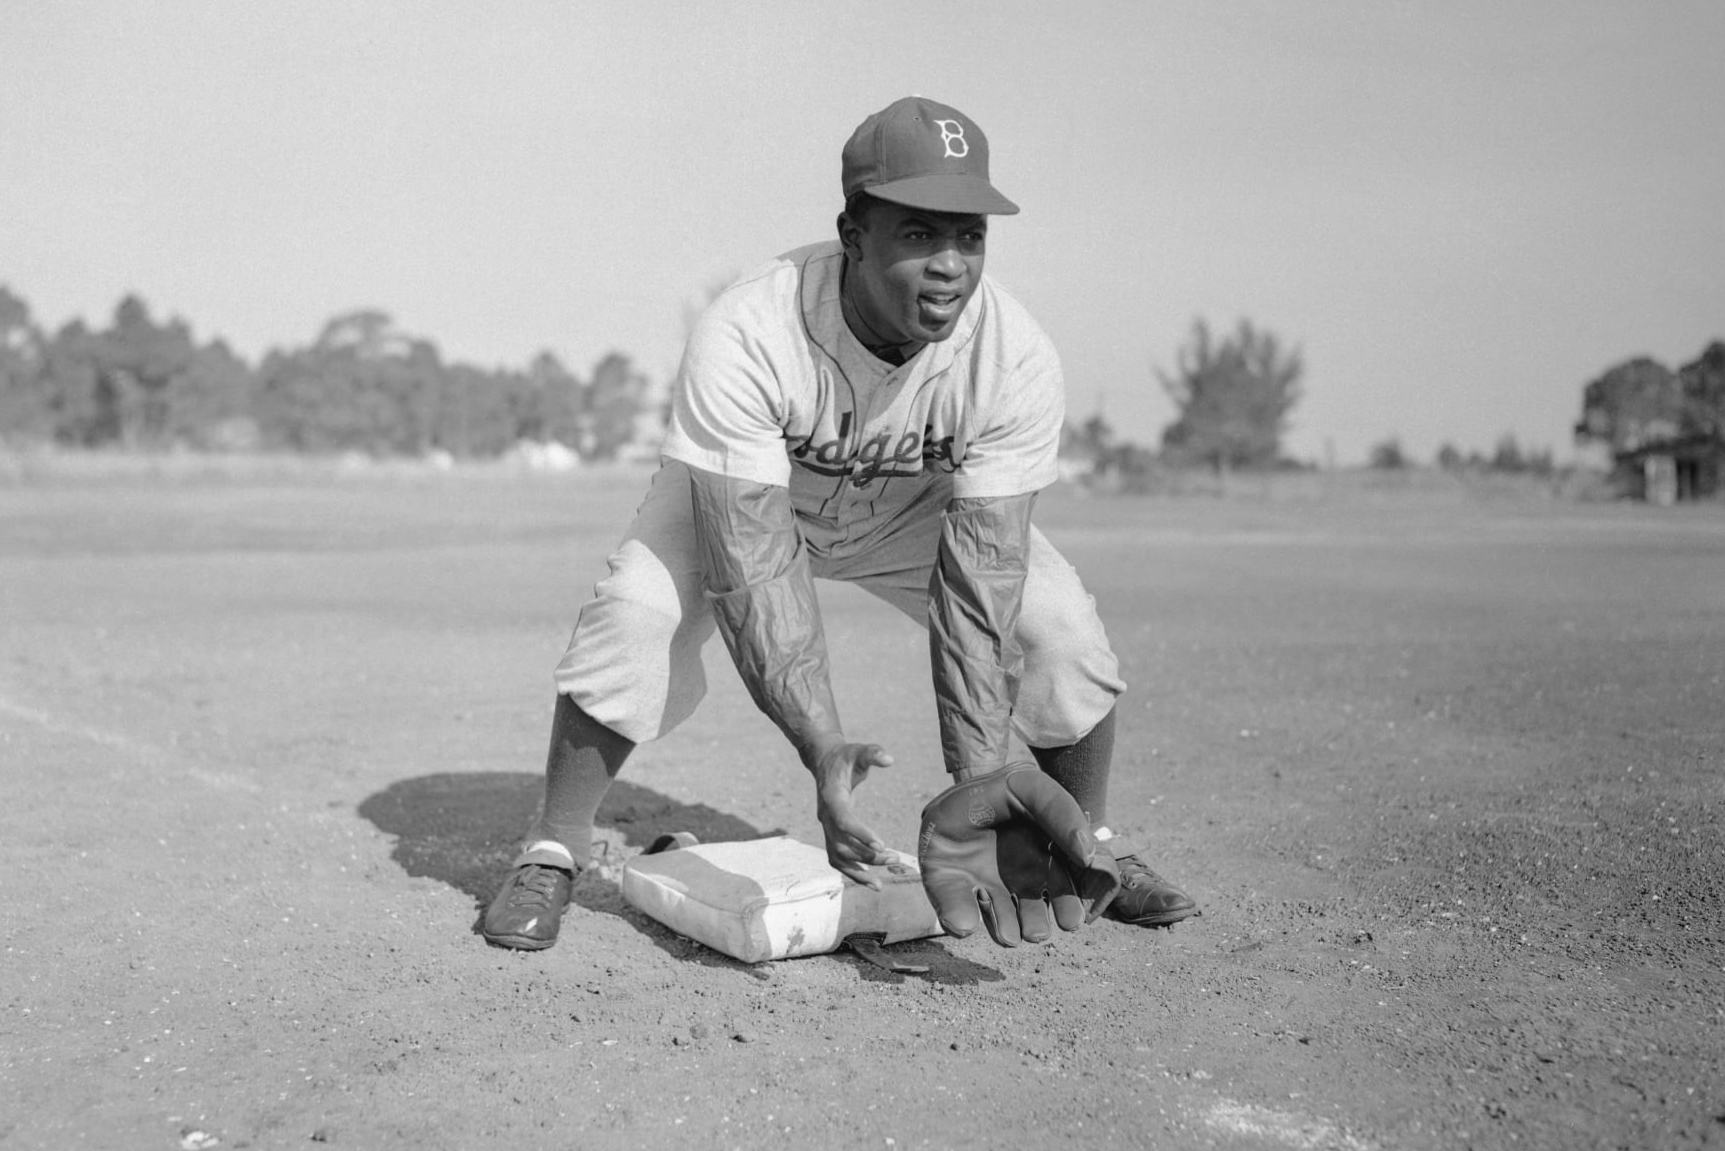 Texas Rangers honor Jackie Robinson at important time